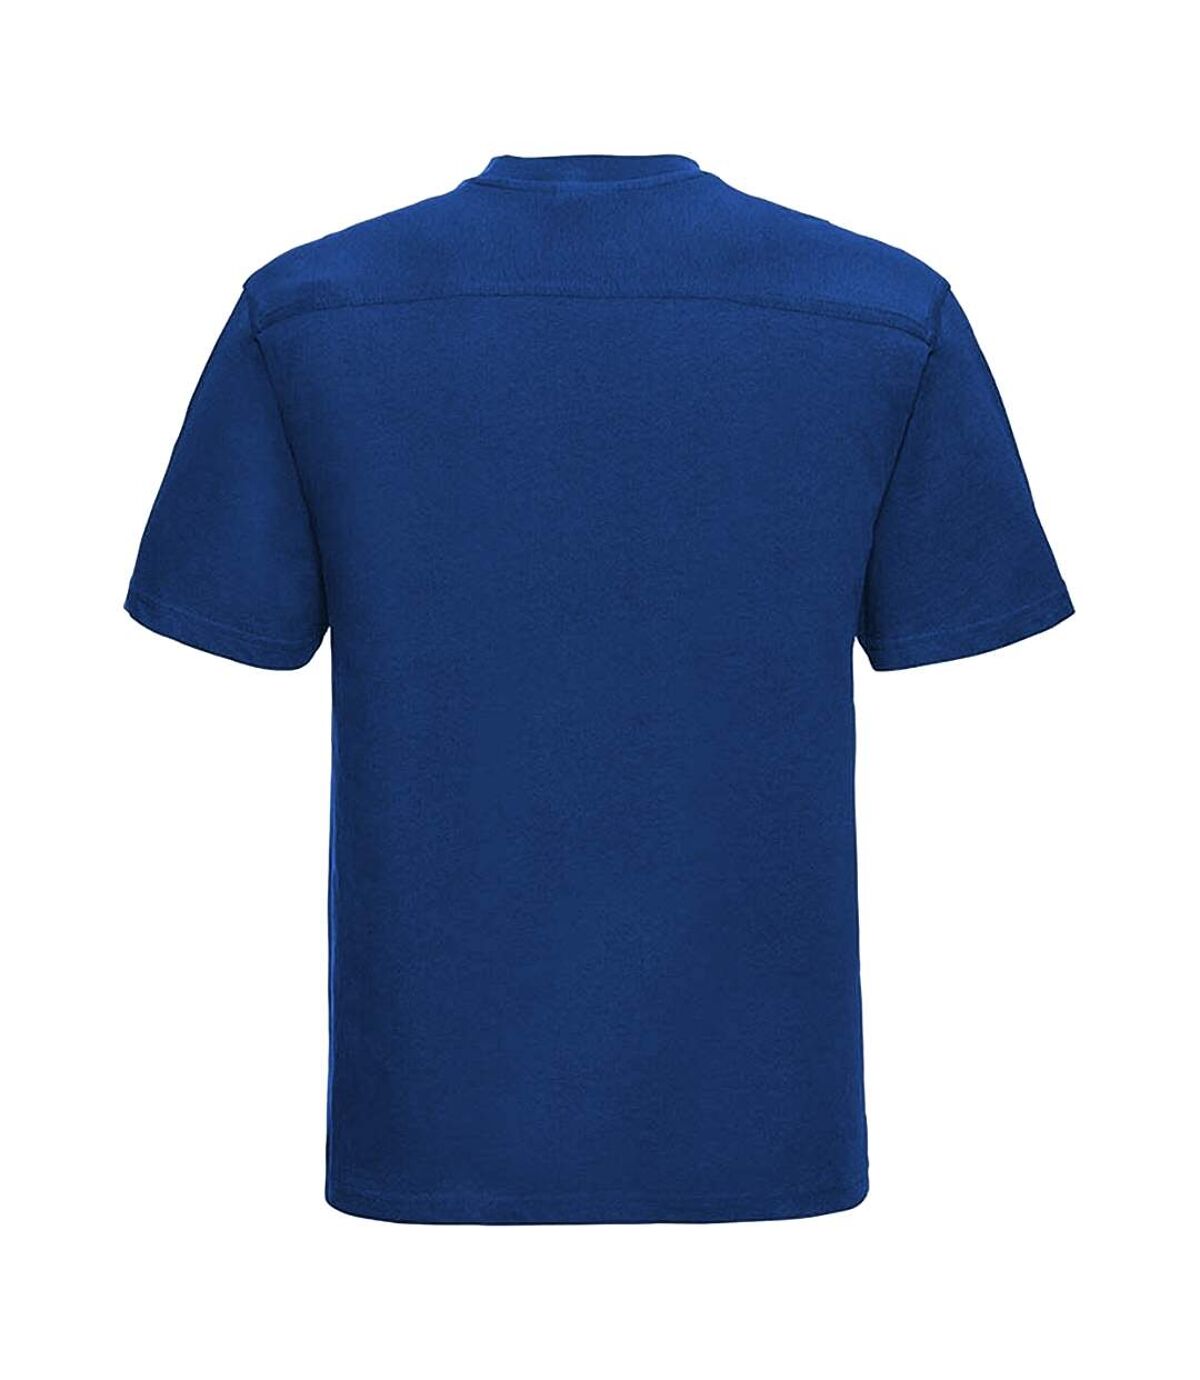 Russell Europe Mens Workwear Short Sleeve Cotton T-Shirt (Bright Royal)